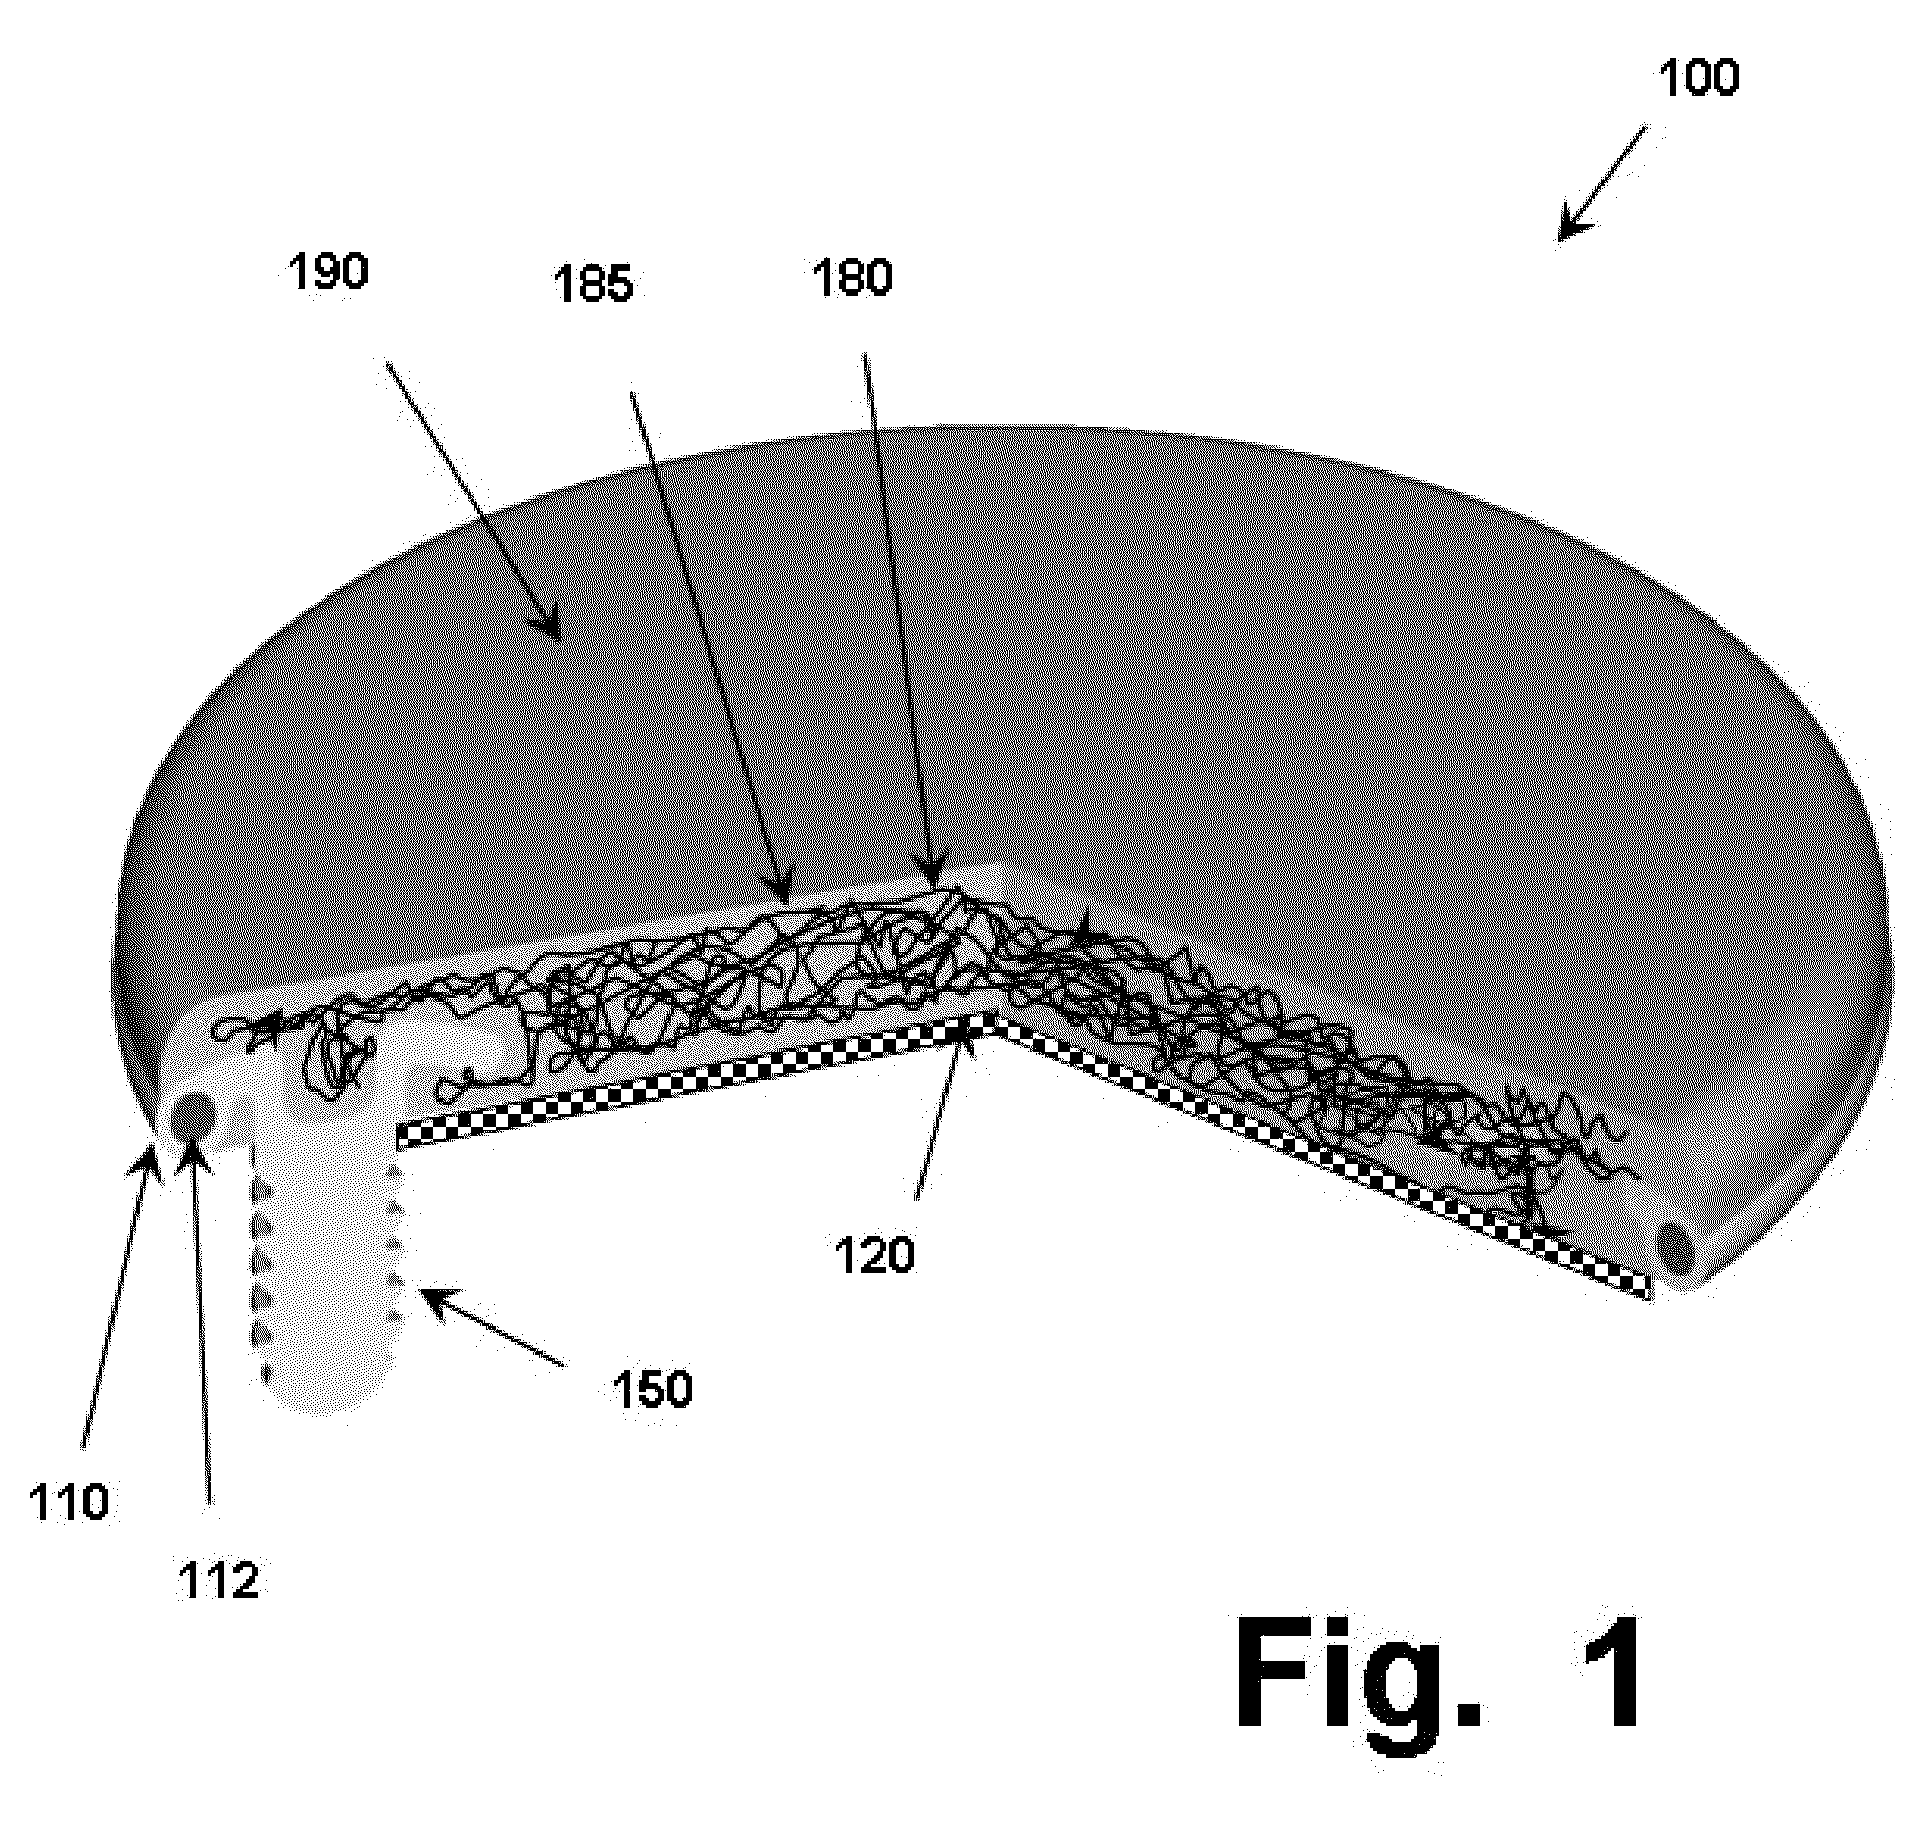 Anchoring systems and interfaces for flexible surgical implants for replacing cartilage